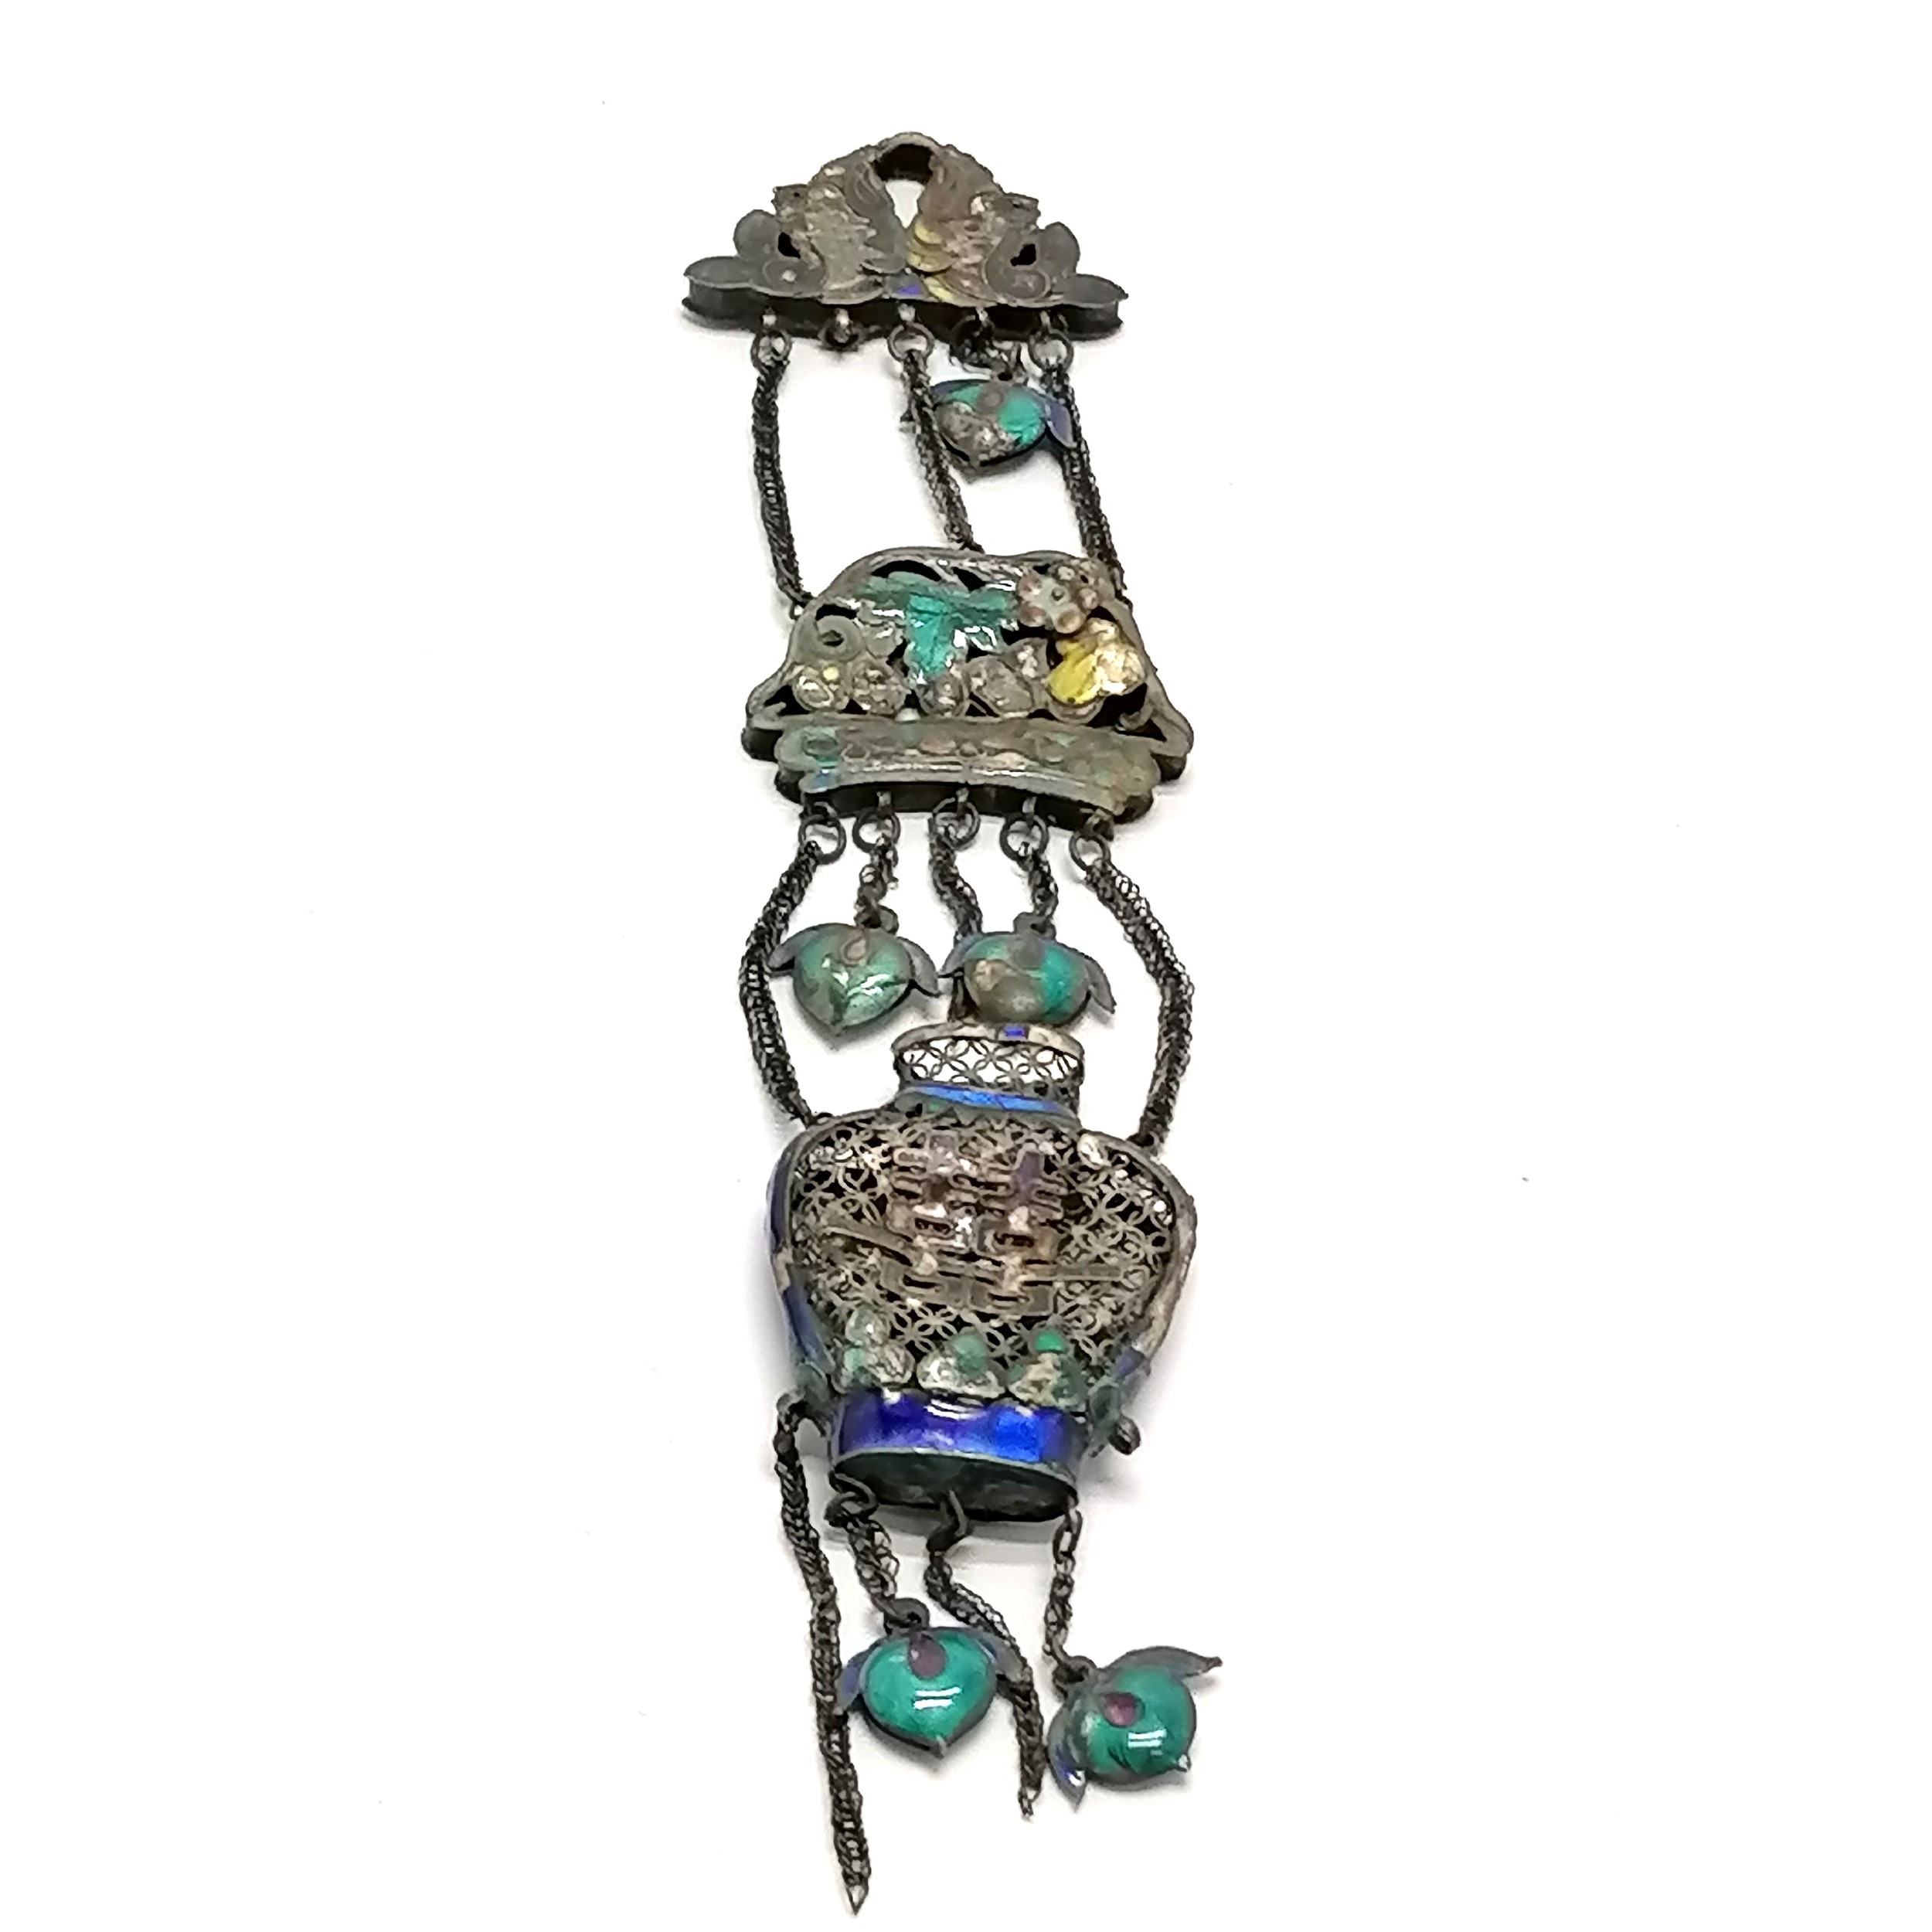 Antique Chinese unmarked silver & enamel hanging decoration - 18cm drop ~ 20g total weight & has